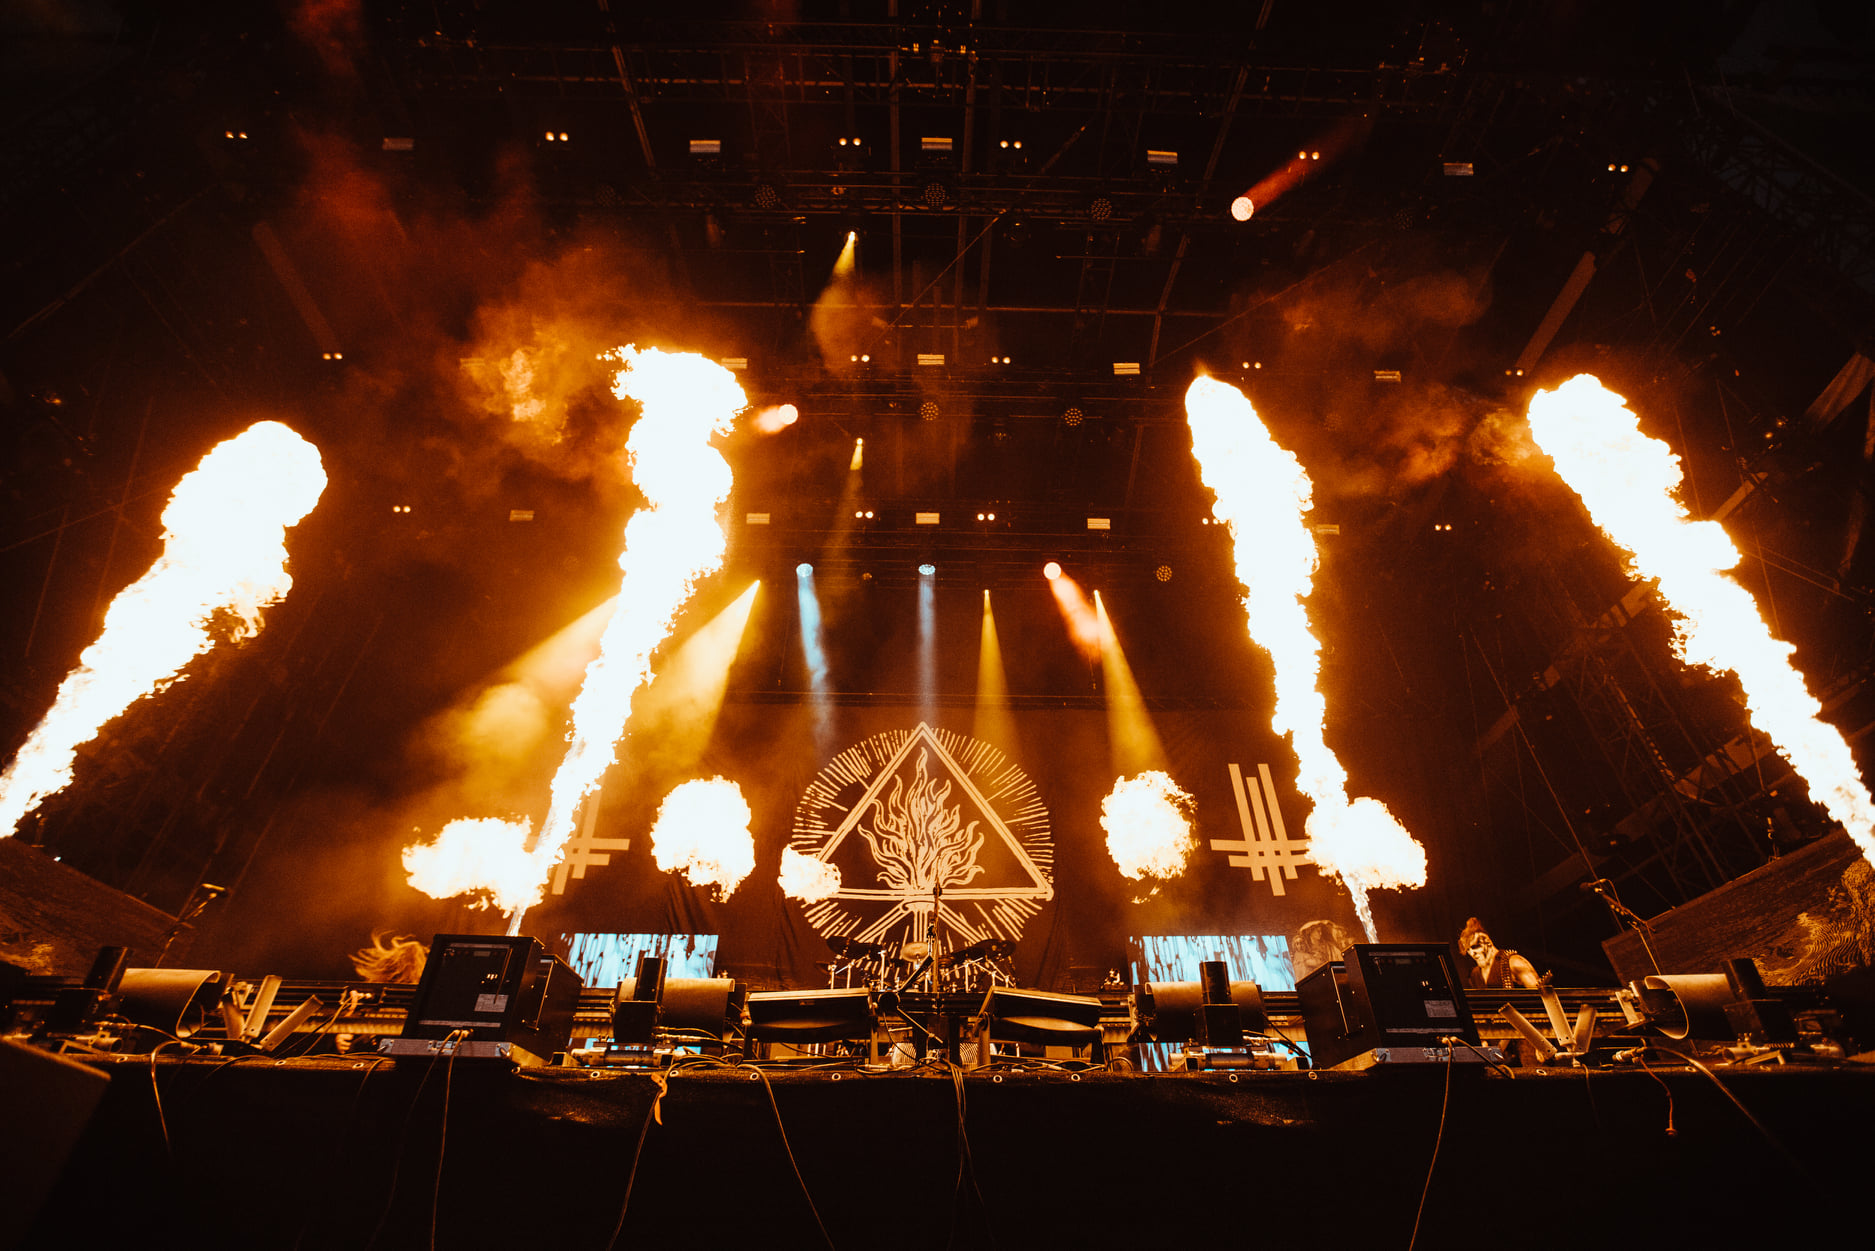 Full force stage with fire